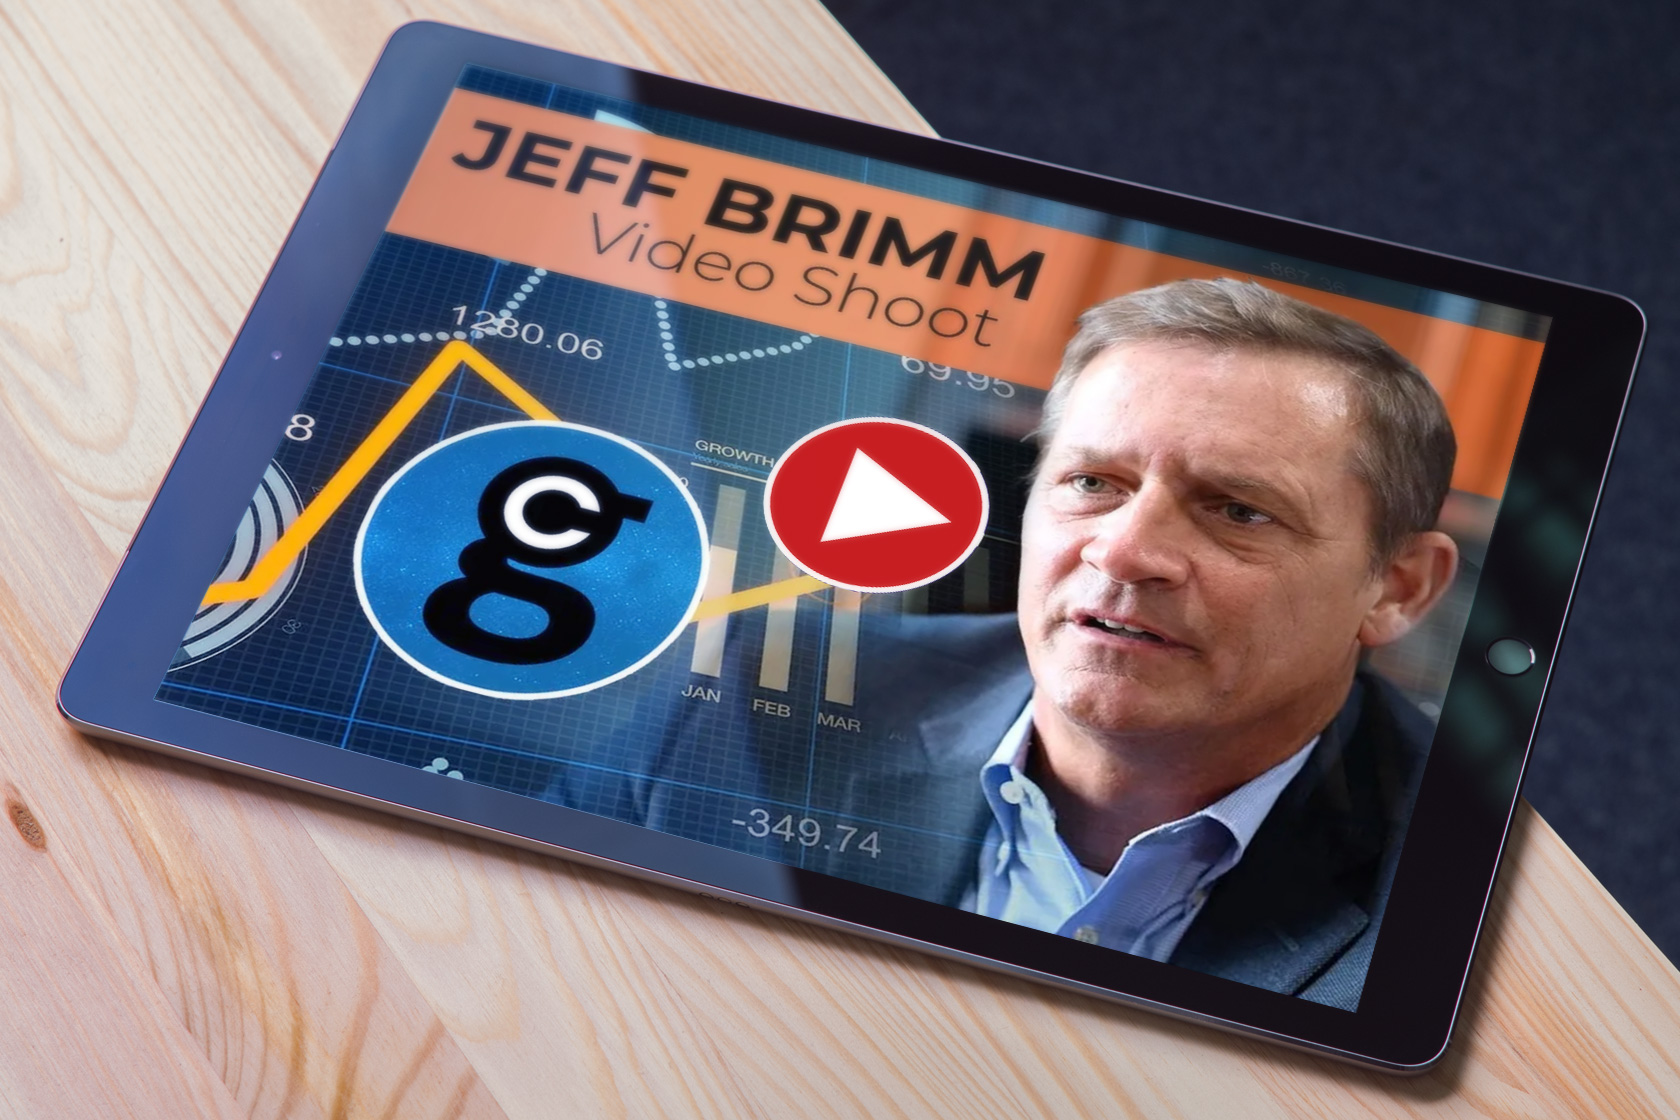 iPad with Stonebridge Capital Partners Jeff Brimm Video resting on a table